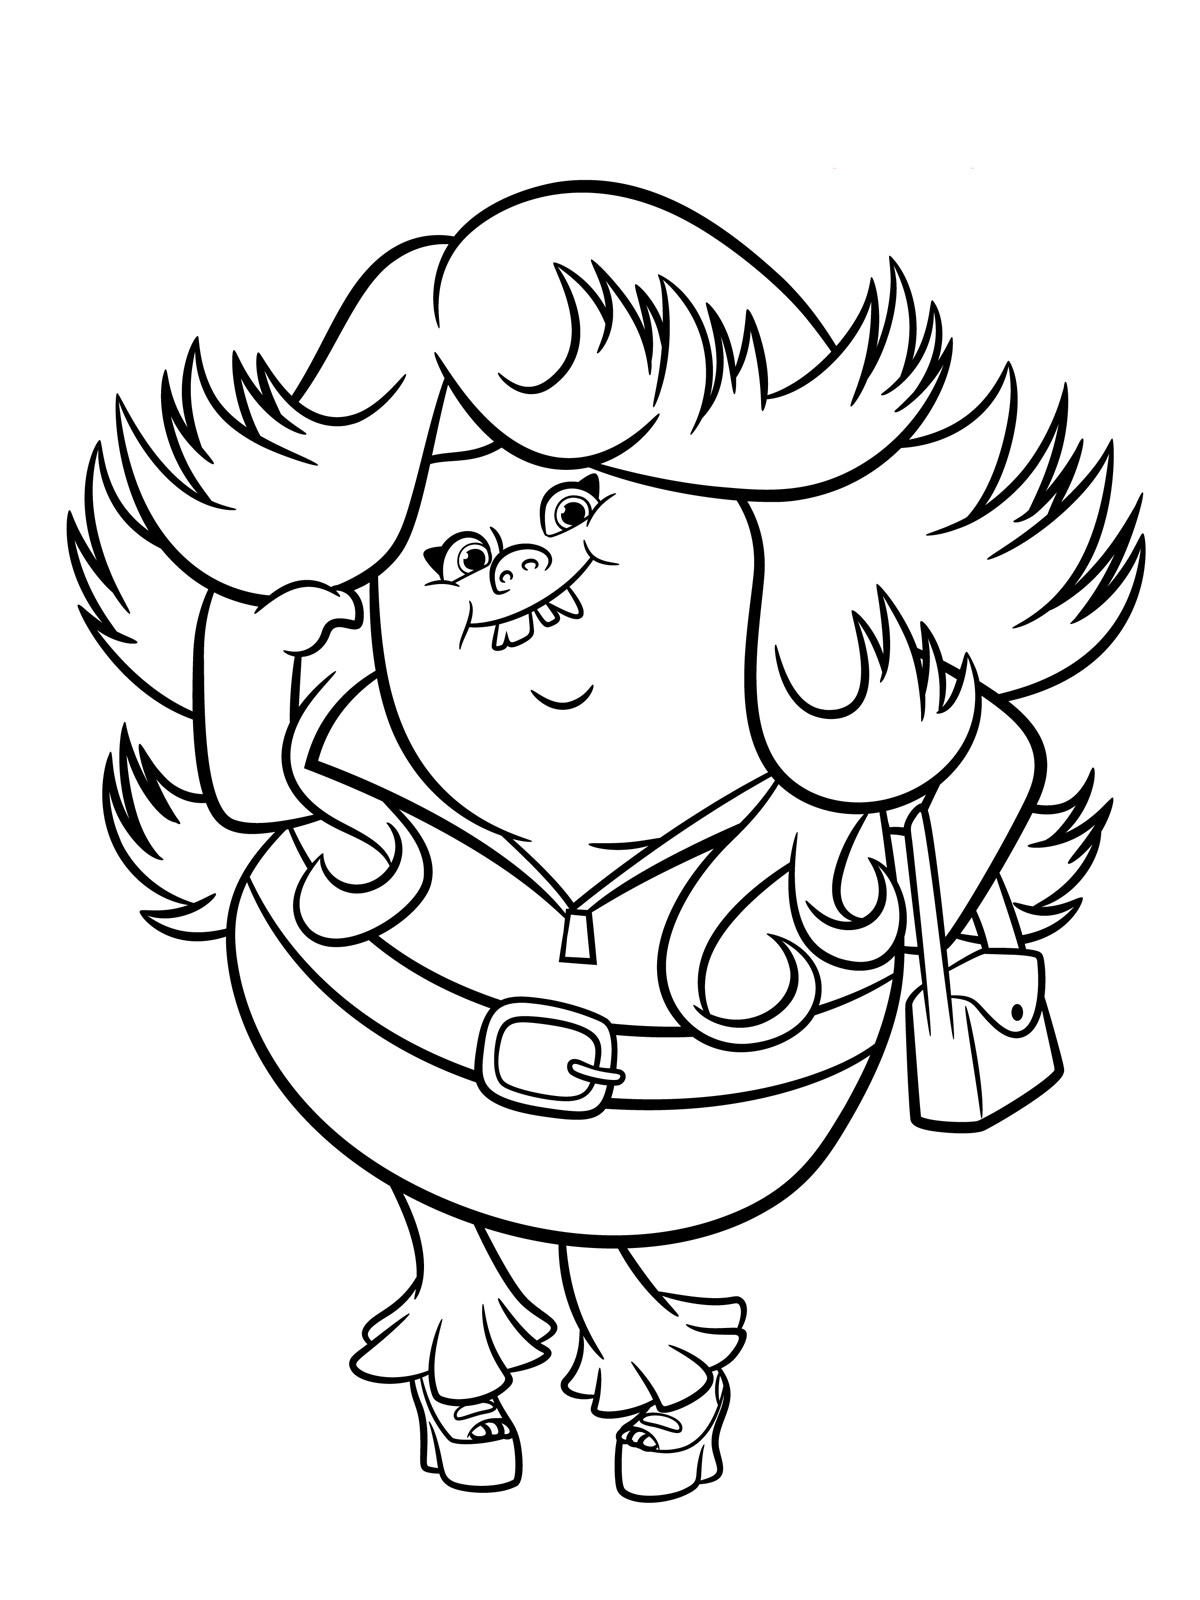 Free Coloring Sheets For Kids Trolls
 Trolls Coloring pages to and print for free